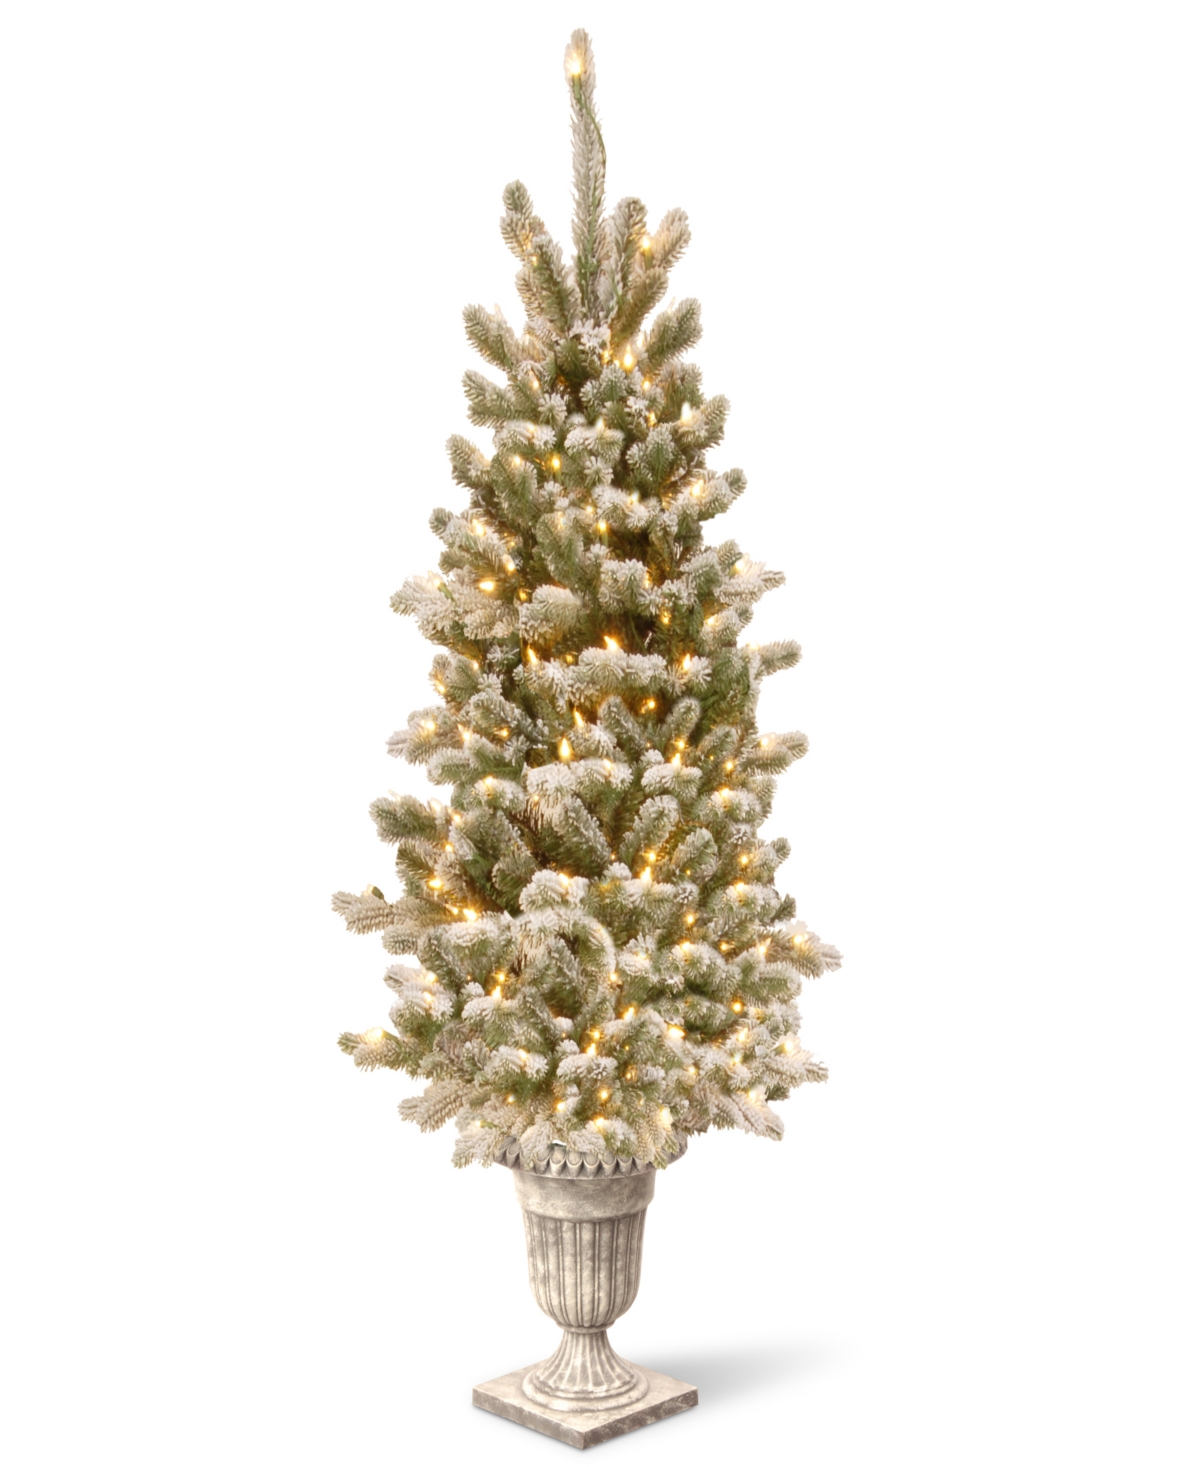 National Tree Company 4' Snowy Sheffield Spruce Entrance Tree With Twinkly Led Lights In Green